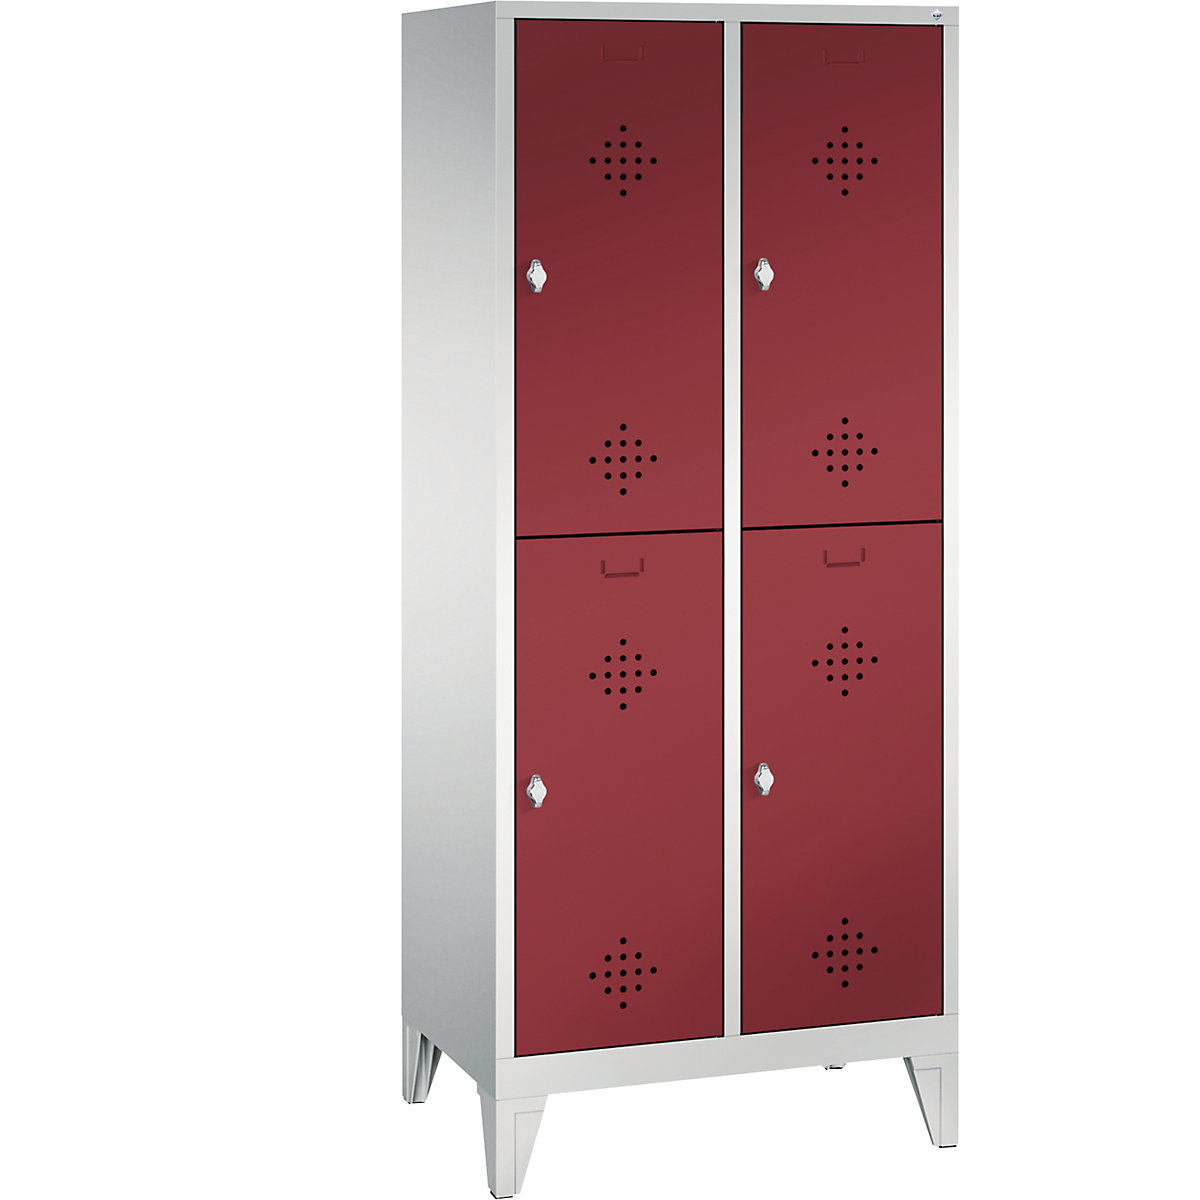 CLASSIC cloakroom locker with feet, double tier – C+P, 2 compartments, 2 shelf compartments each, compartment width 400 mm, light grey / ruby red-11